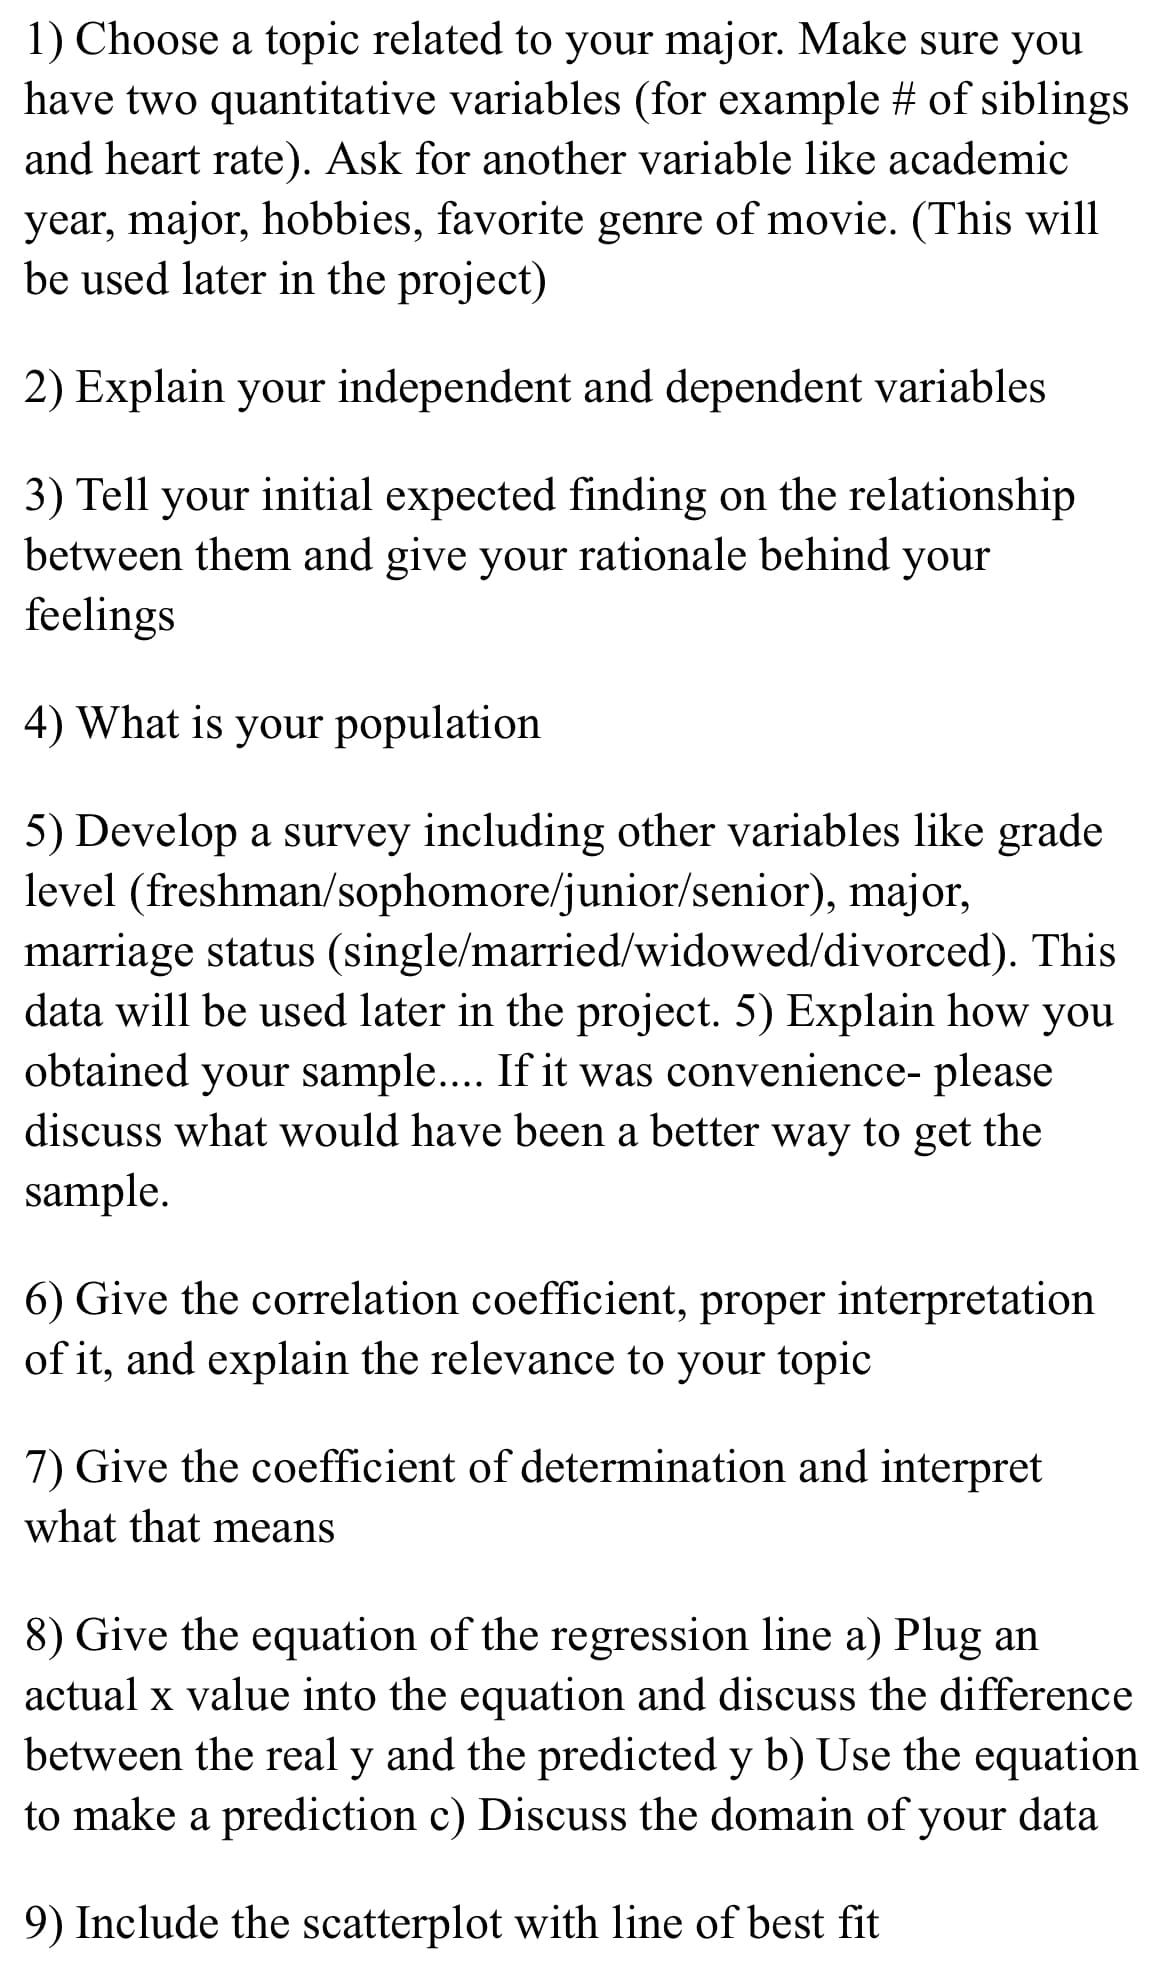 1) Choose a topic related to your major. Make sure you
have two quantitative variables (for example # of siblings
and heart rate). Ask for another variable like academic
year, major, hobbies, favorite genre of movie. (This will
be used later in the project)
2) Explain your independent and dependent variables
3) Tell your initial expected finding on the relationship
between them and give your rationale behind your
feelings
4) What is your population
5) Develop a survey including other variables like grade
level (freshman/sophomore/junior/senior), major,
marriage status (single/married/widowed/divorced). This
data will be used later in the project. 5) Explain how you
obtained your sample.... If it was convenience- please
discuss what would have been a better way to get the
sample.
6) Give the correlation coefficient, proper interpretation
of it, and explain the relevance to your topic
7) Give the coefficient of determination and interpret
what that means
8) Give the equation of the regression line a) Plug an
actual x value into the equation and discuss the difference
between the real y and the predicted y b) Use the equation
to make a prediction c) Discuss the domain of your data
9) Include the scatterplot with line of best fit